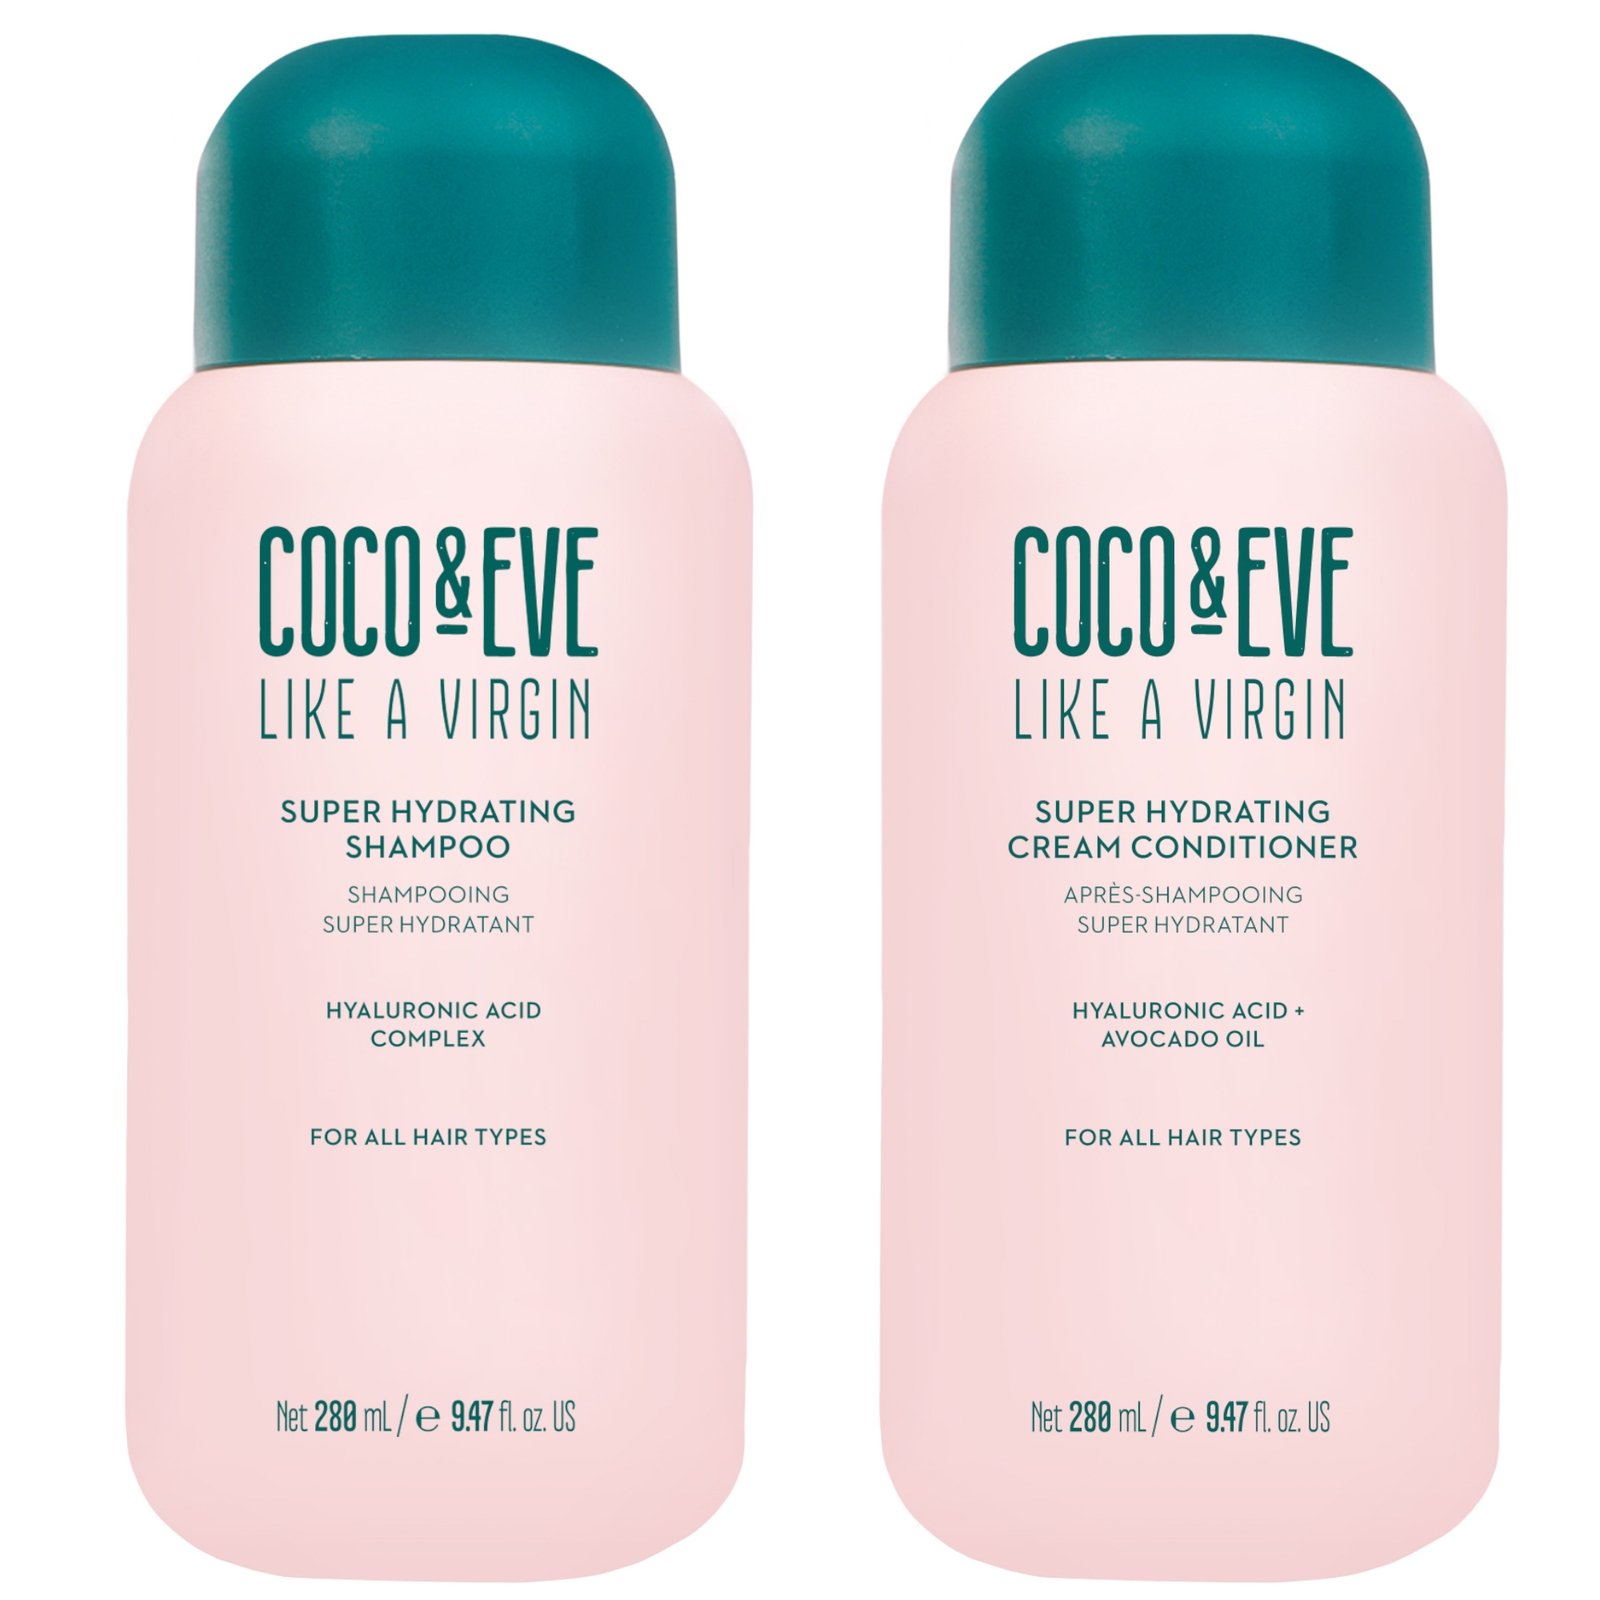 Coco & Eve Super Hydration Duo Kit In White